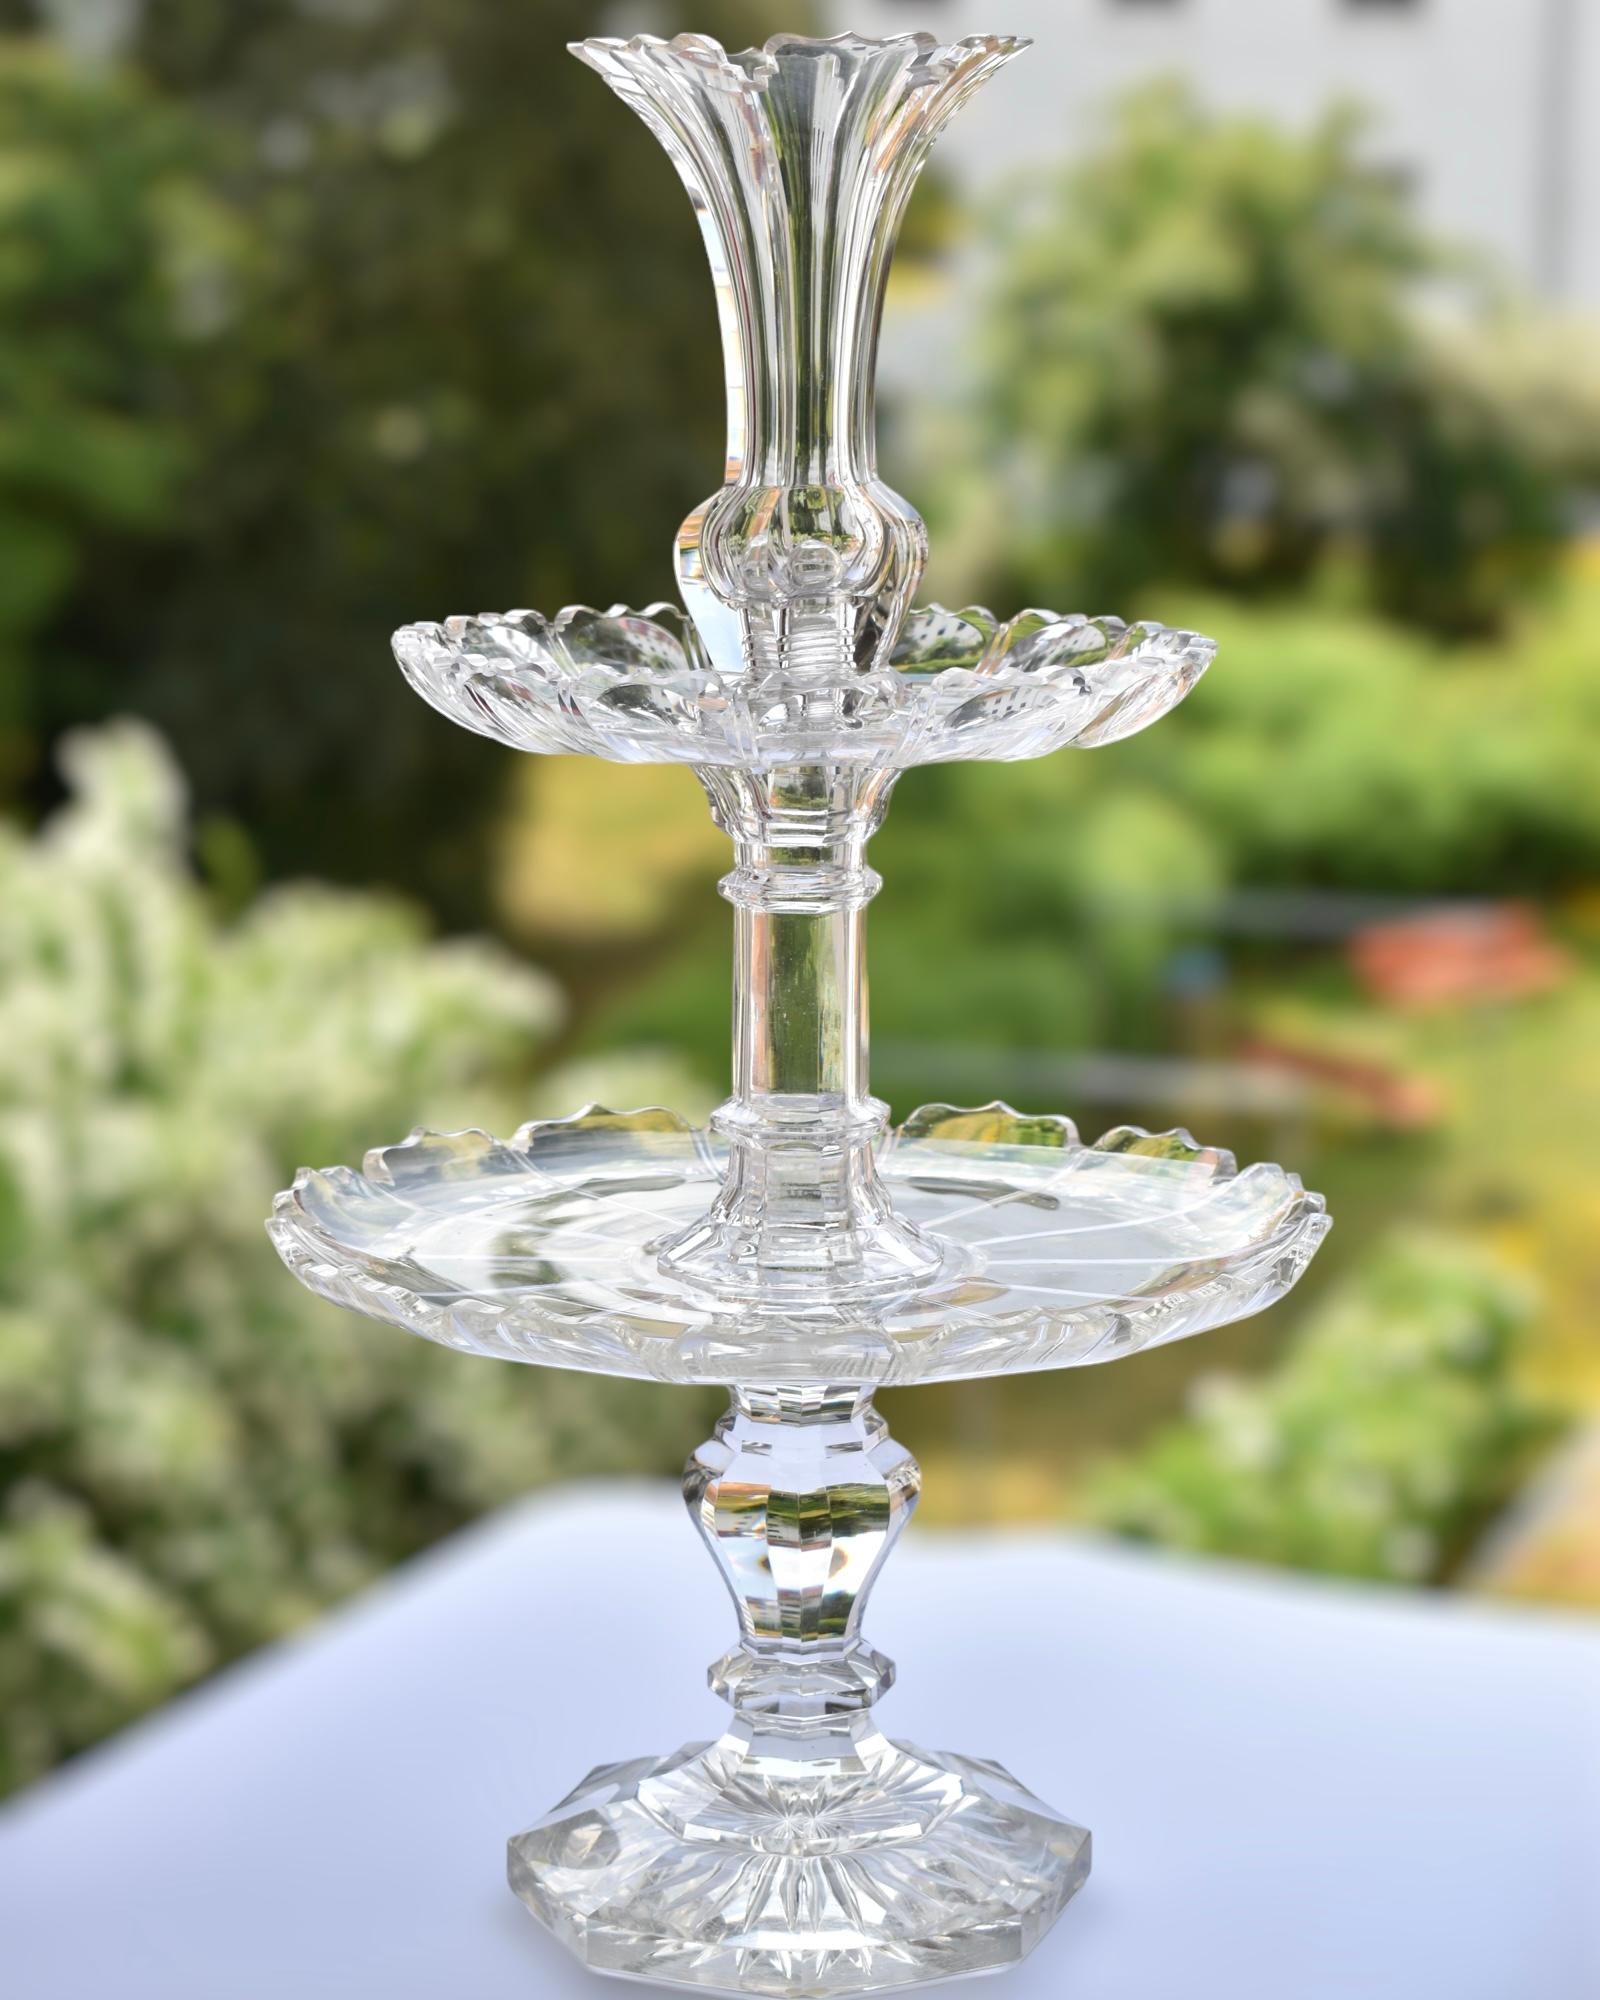 High Quality 19th C. Crystal Centerpiece in Clear Transparent Crystal Glass by Baccarat

Brilliantly Cut with Petal Rims

Base Cut in Star Shape Underneath

Perfect for Candy, Fruit or Flowers

France, Circa 1880
